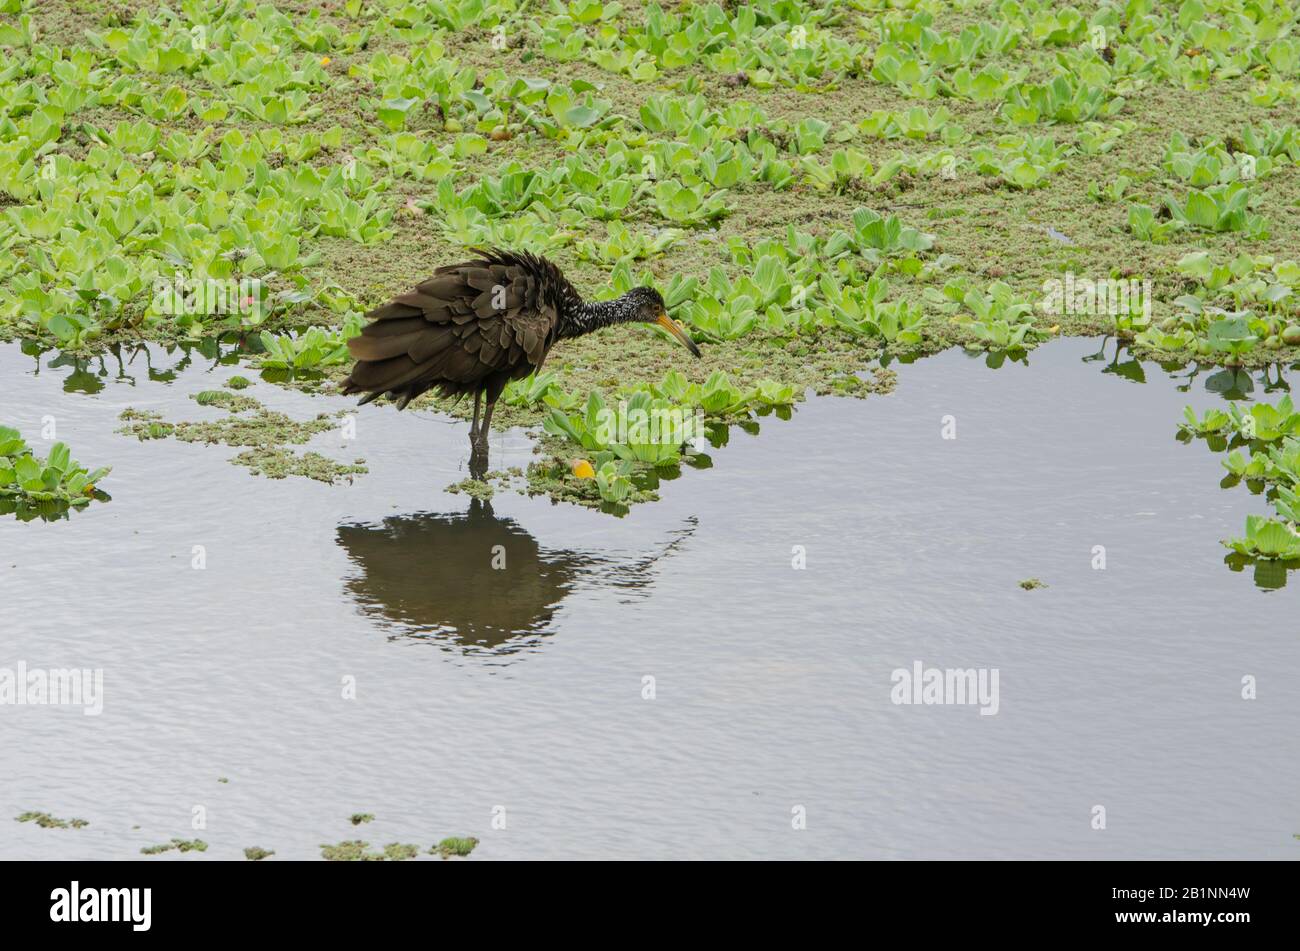 Limpkin, aramus guarauna, also known as carrao, courlan or crying bird; in a lagoon with abundant aquatic plants. Costanera Sur Ecological Reserve, Bu Stock Photo